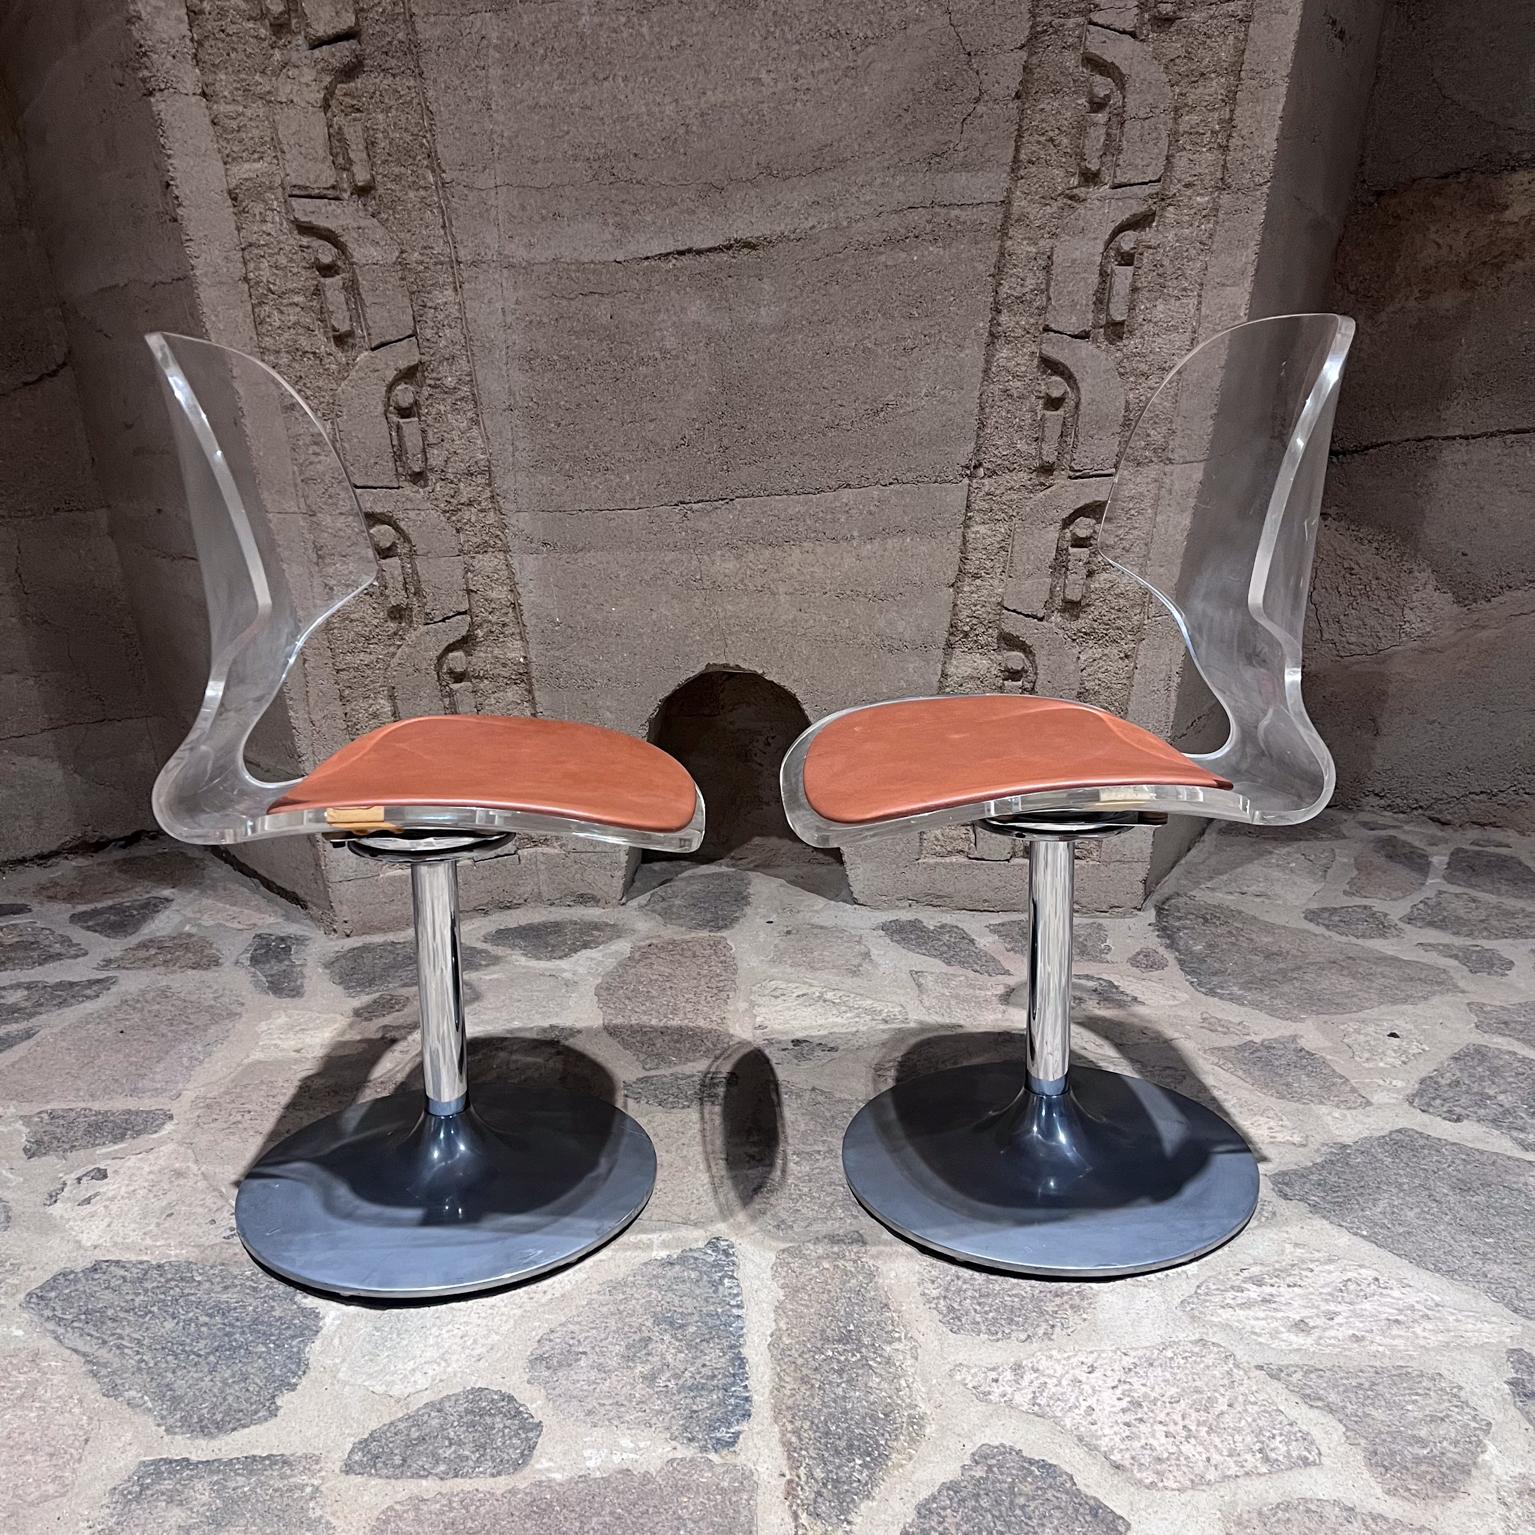 1980s pair of lucite and chrome plated dining chairs swivel feature
after Charles Hollis Jones
Made by Hill Manufacturing
Featured in Scarface film!
Vintage chair presentation lucite has minor scuffs.
New leather and chrome. Aluminum base has been